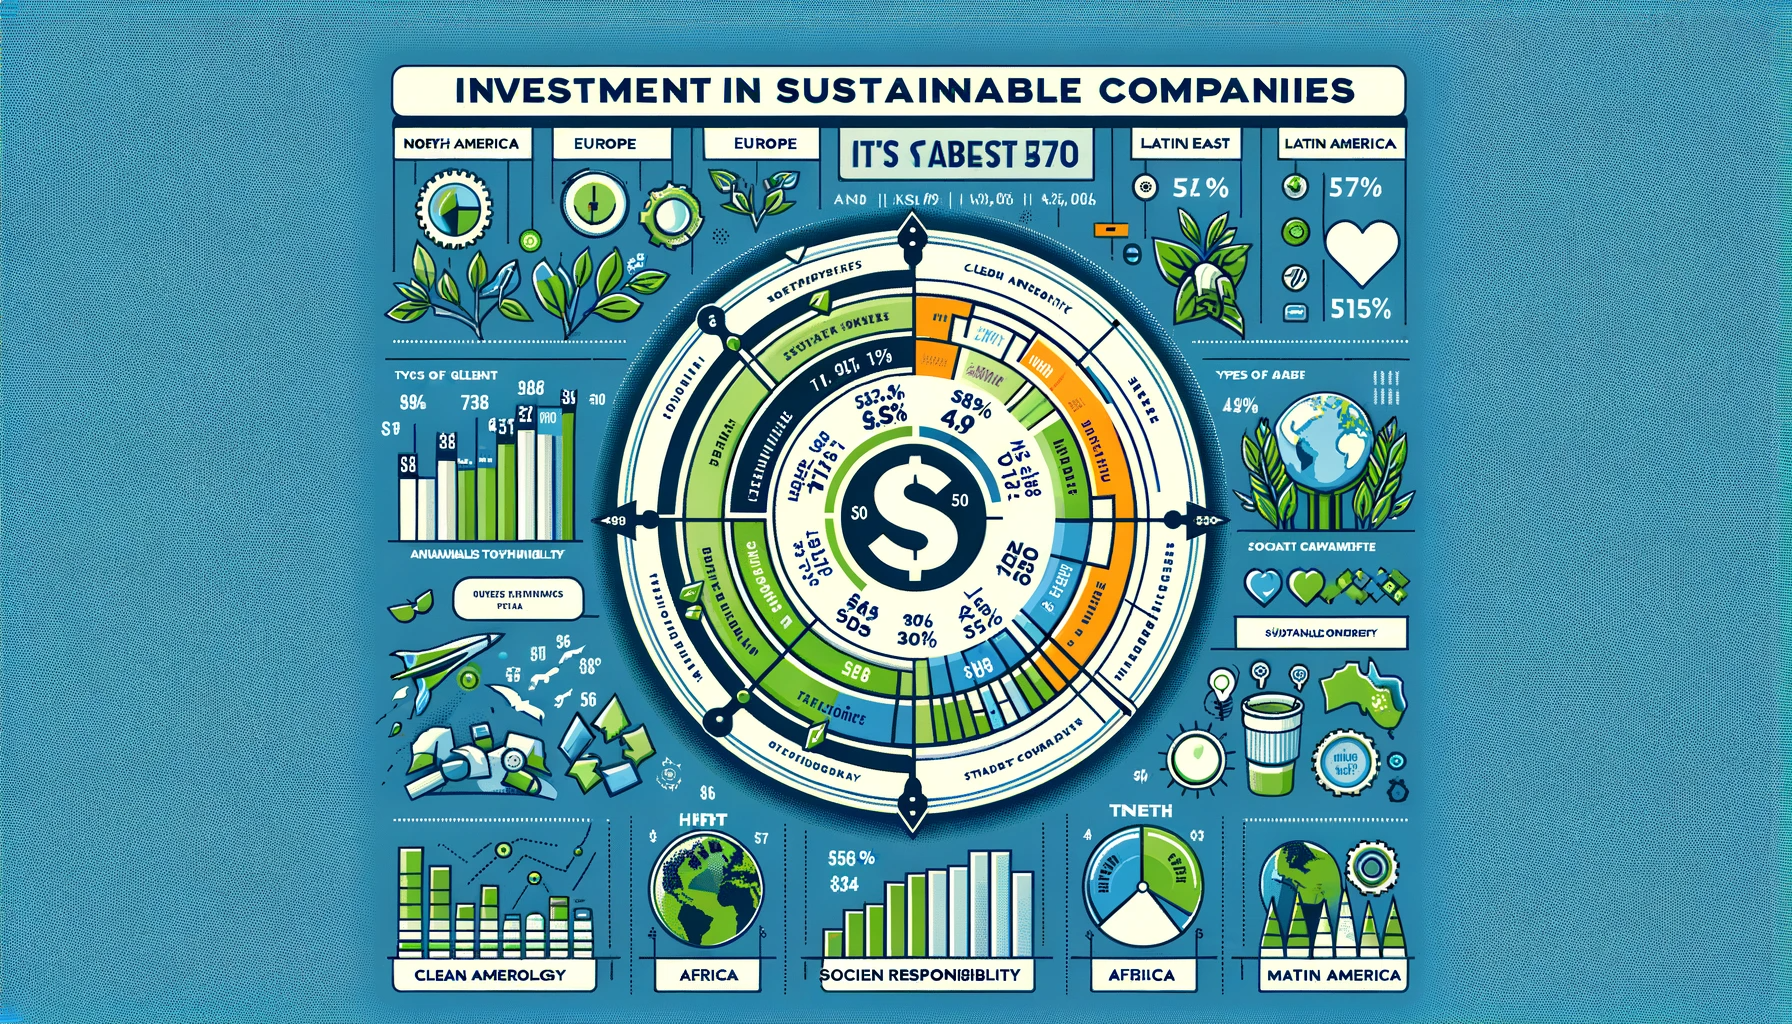 Invest in sustainable companies